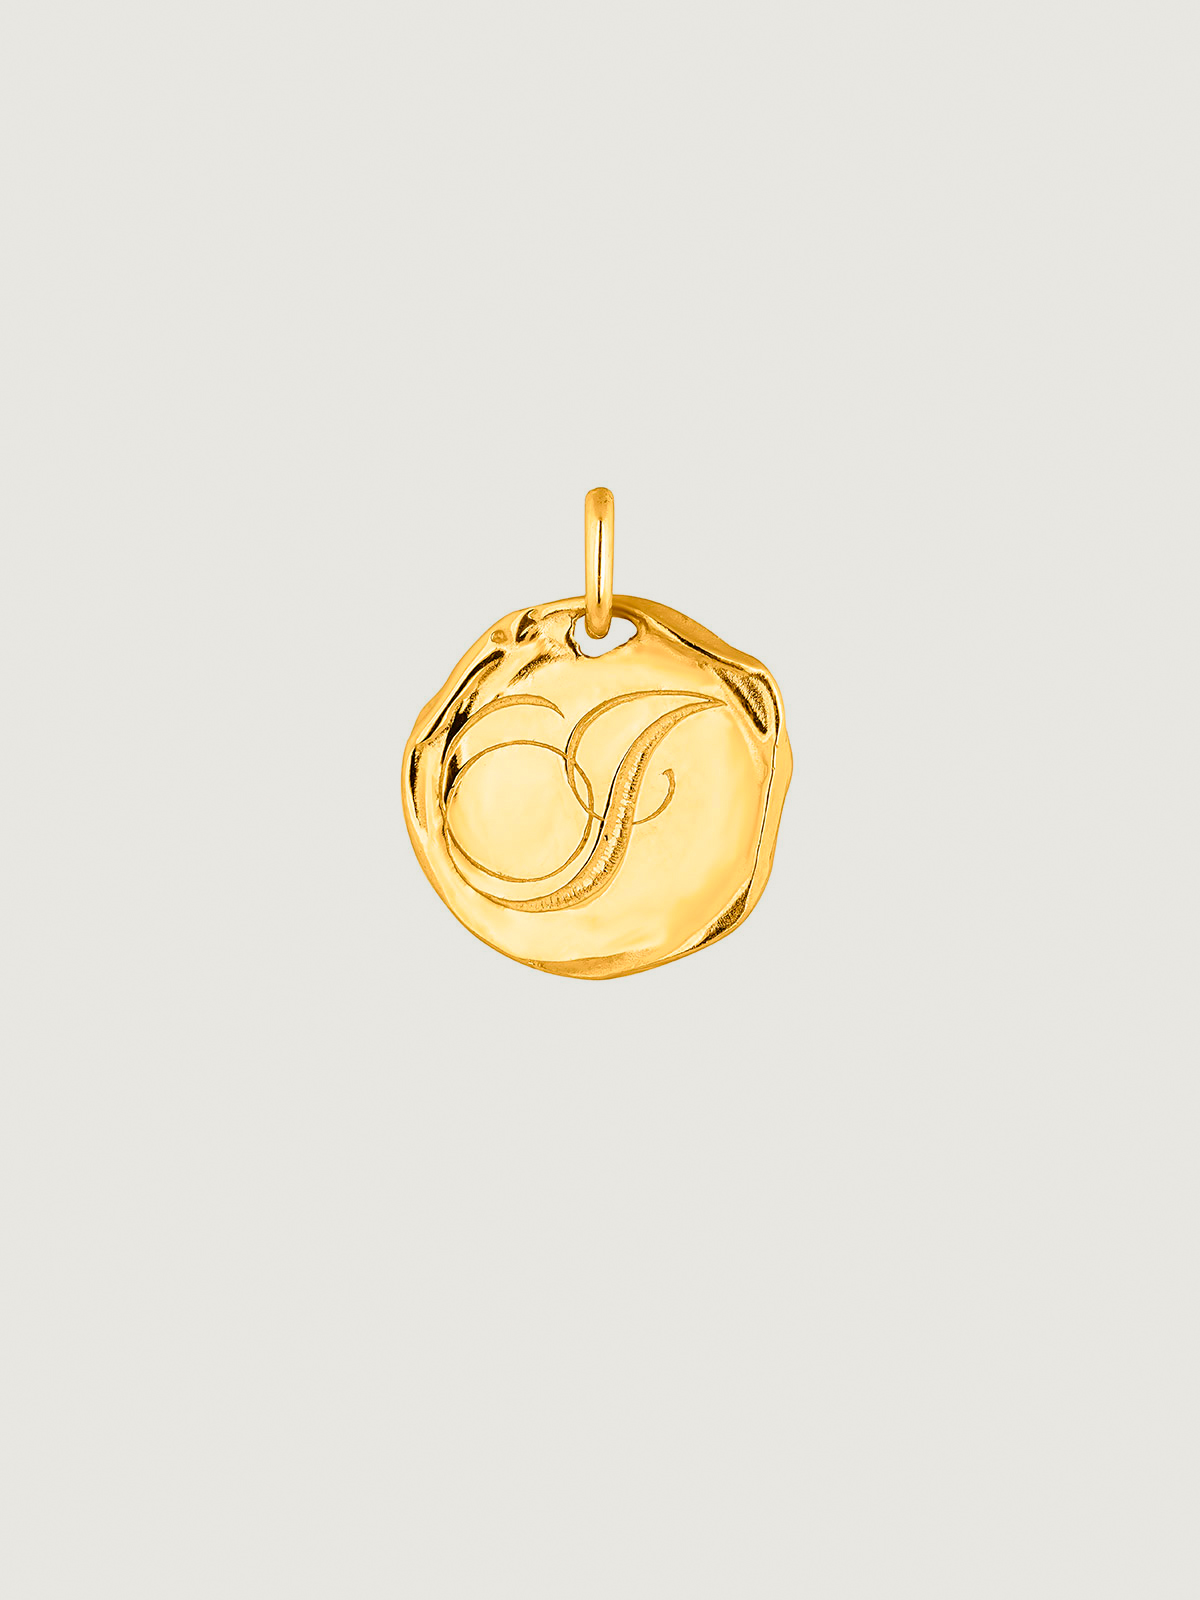 Handcrafted charm made of 925 silver, bathed in 18K yellow gold with initial J.